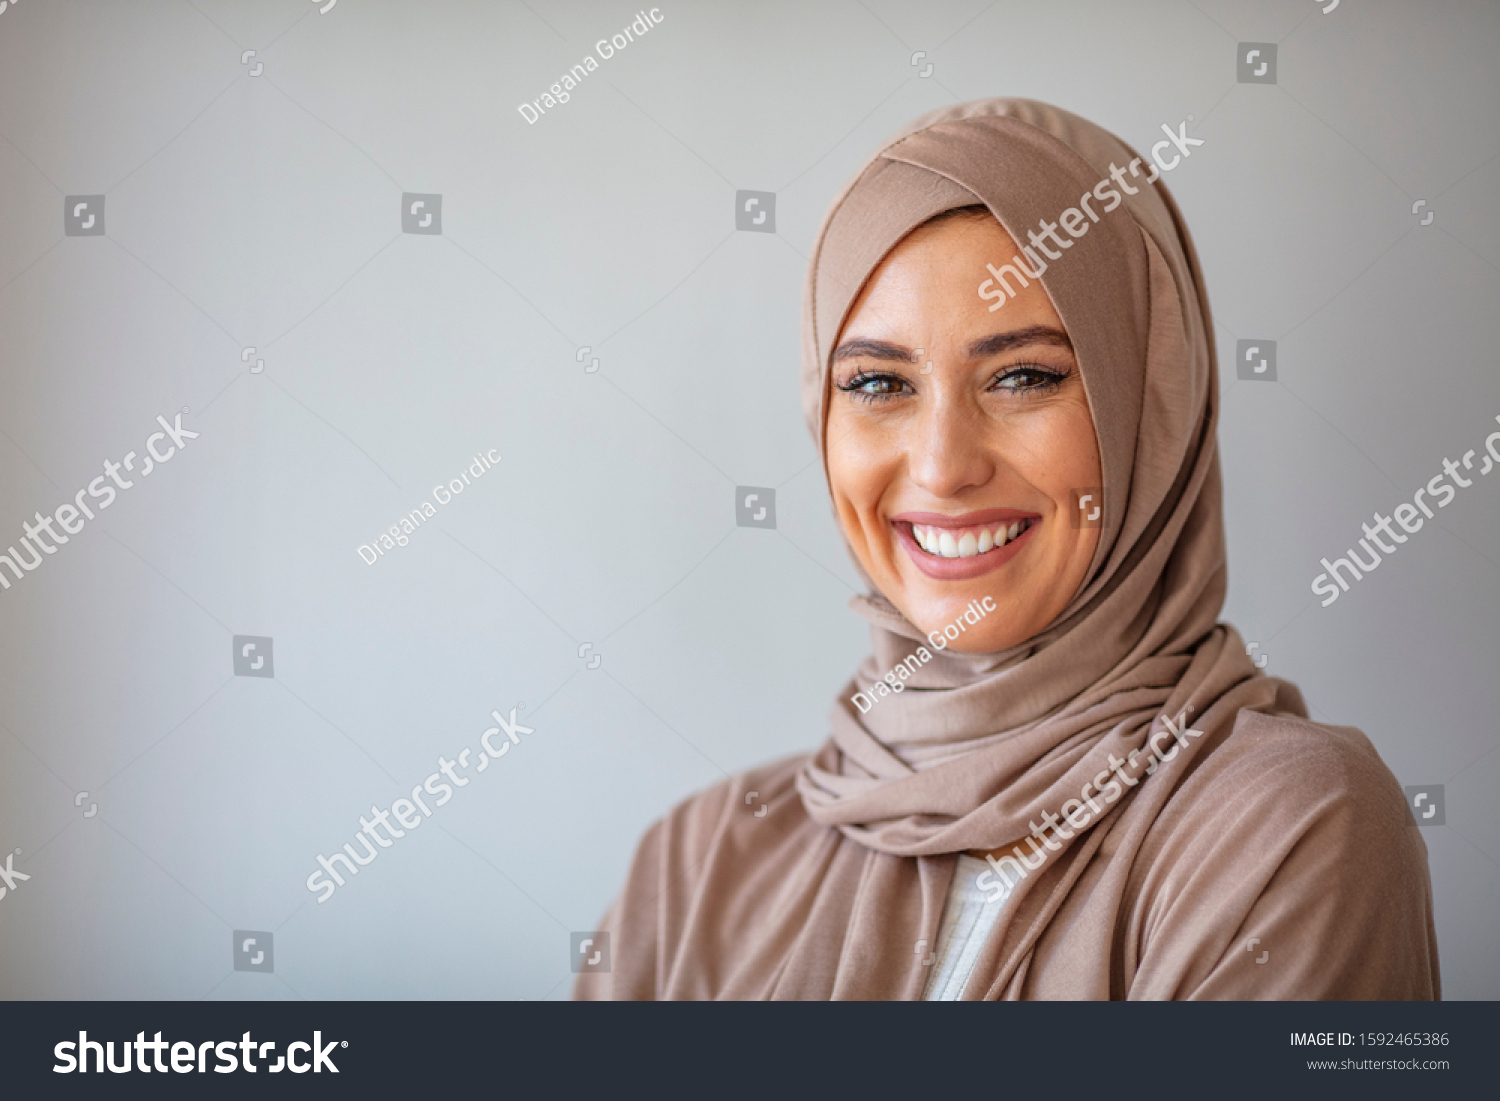 Woman in traditional Muslim clothing, smiling. Beautiful woman headshot looking at camera and wearing a hijab. Arabian woman with happy smile. Strict formal outfit and elegant appearance. Islamic #1592465386